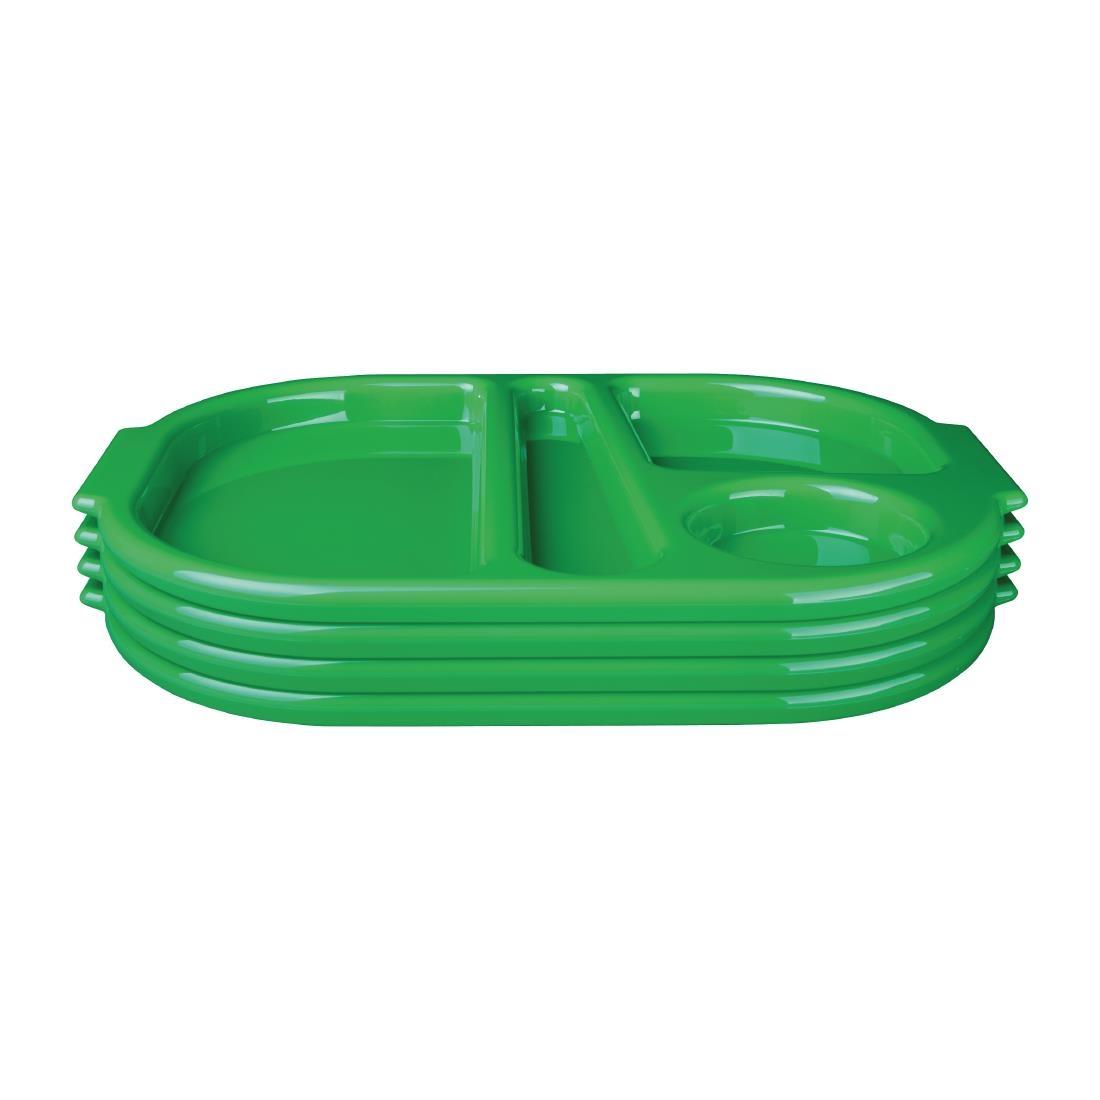 Olympia Kristallon Large Polycarbonate Compartment Food Trays Green 375mm - U040  - 3